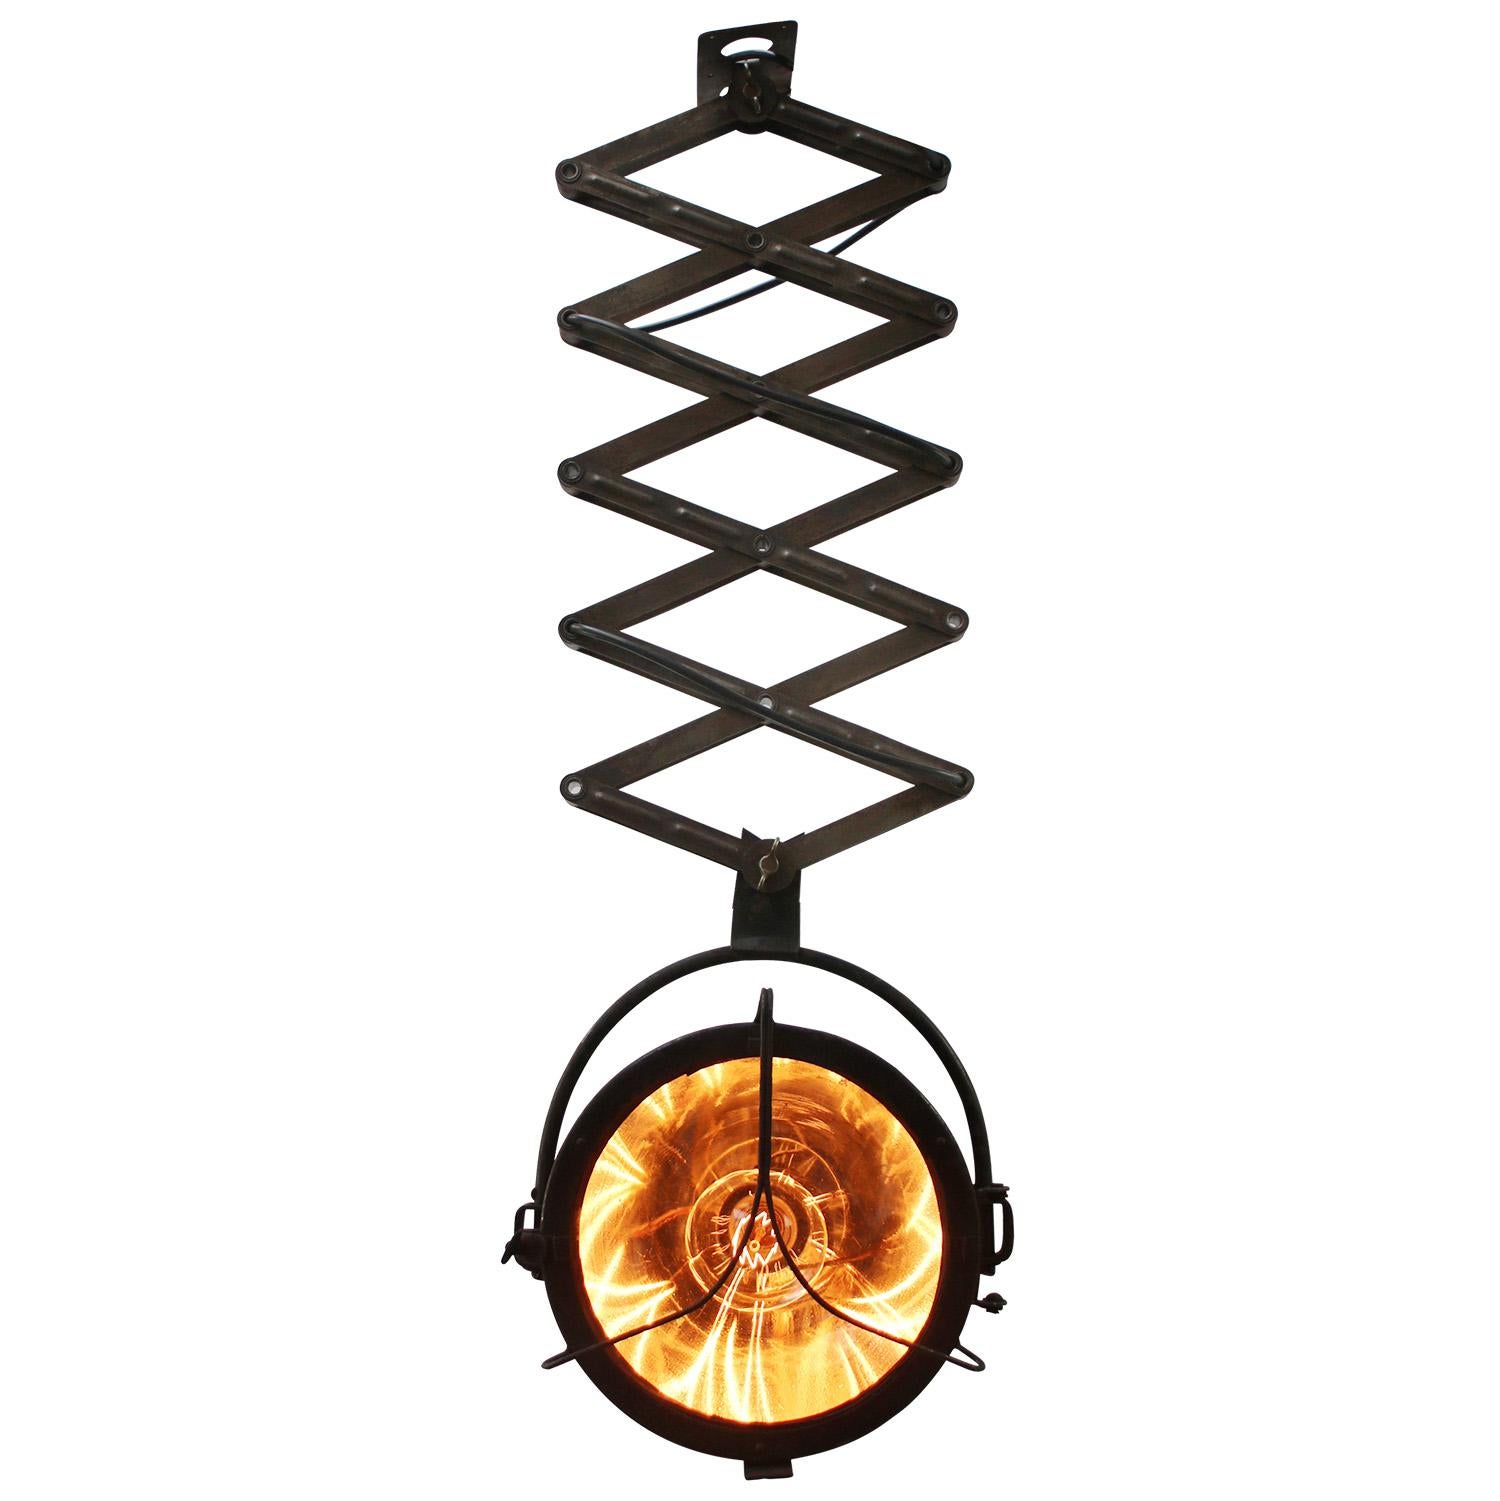 Double scissor with industrial aluminum spot
adjustable length

Spotlight size: diameter 35 cm

as shown on picture 95 cm
min. length 52 cm
max. length 135 cm

E27 / E26

Weight: 7.50 kg / 16.5 lb

Priced per individual item. All lamps have been